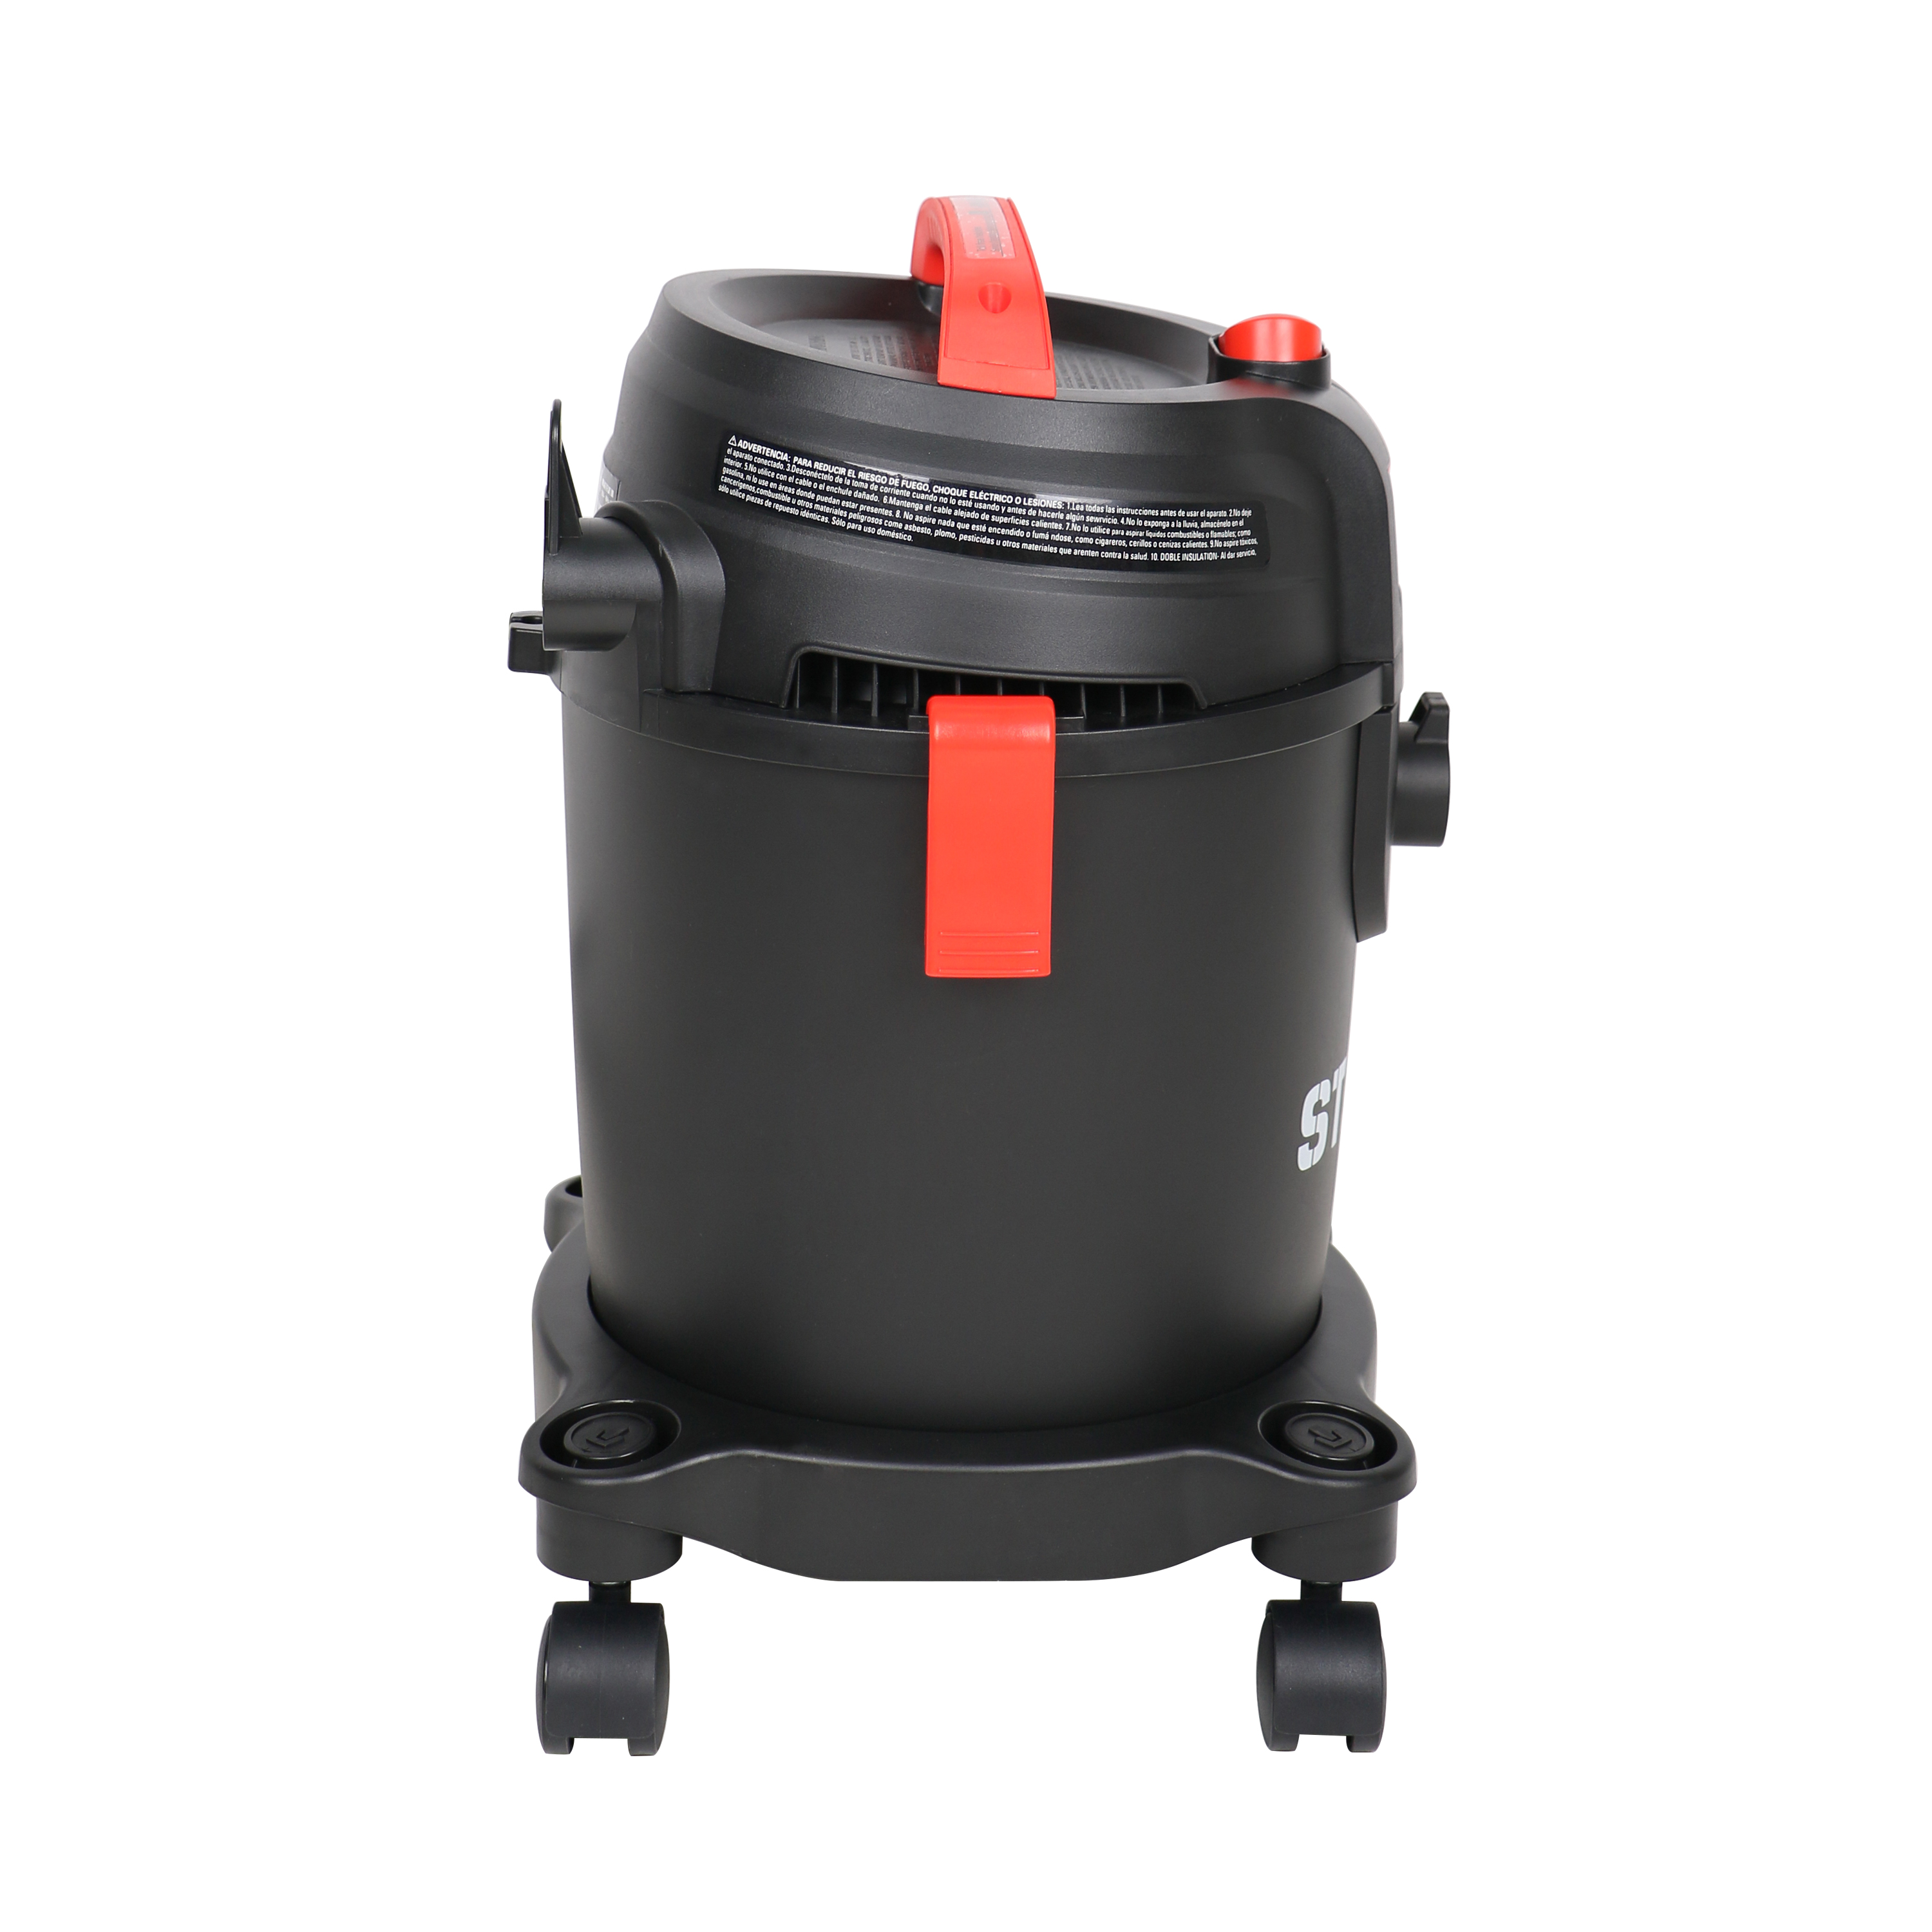 STEALTH 3 Gallon 3 Peak Horsepower Wet Dry Vacuum (AT18202P-3B) with Swiveling Casters - image 4 of 5